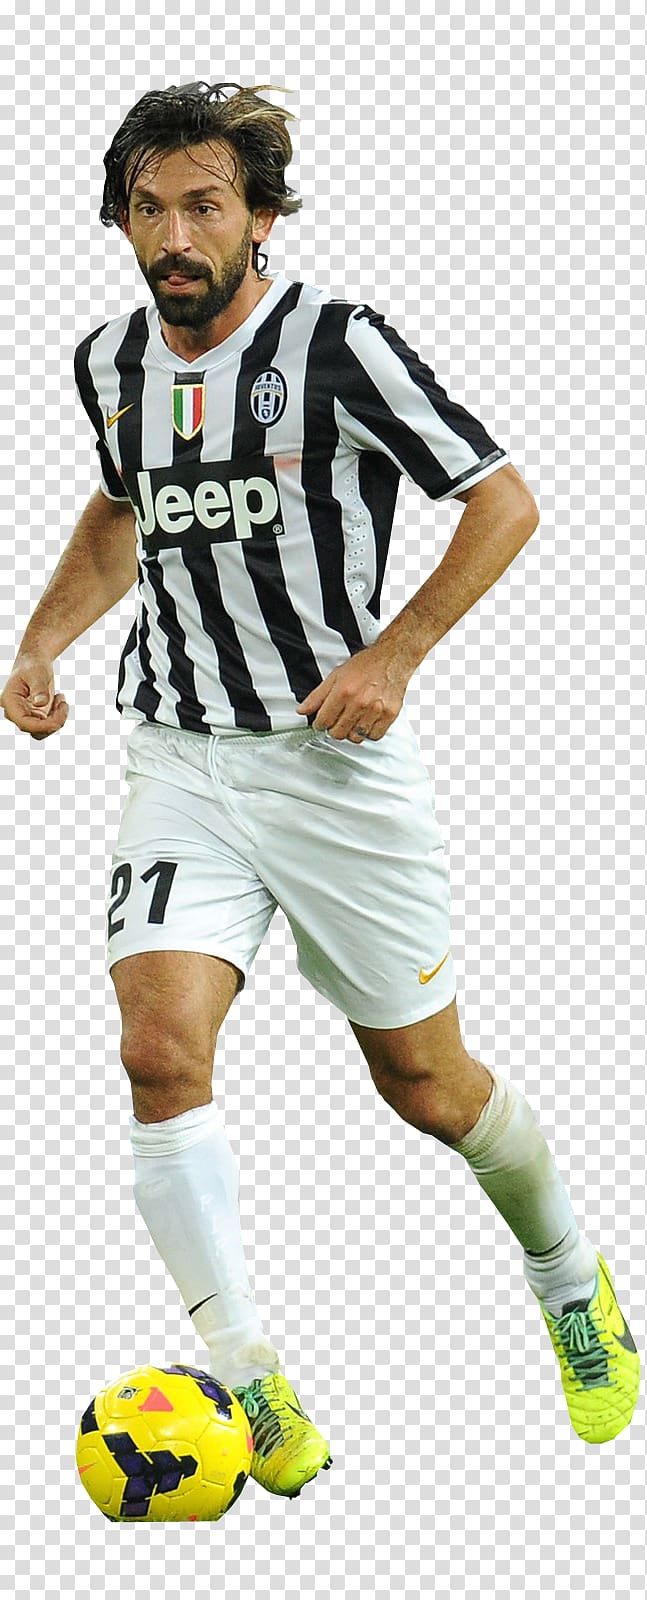 Paul Pogba Football player Juventus F.C. Sport, Andrea Pirlo transparent background PNG clipart